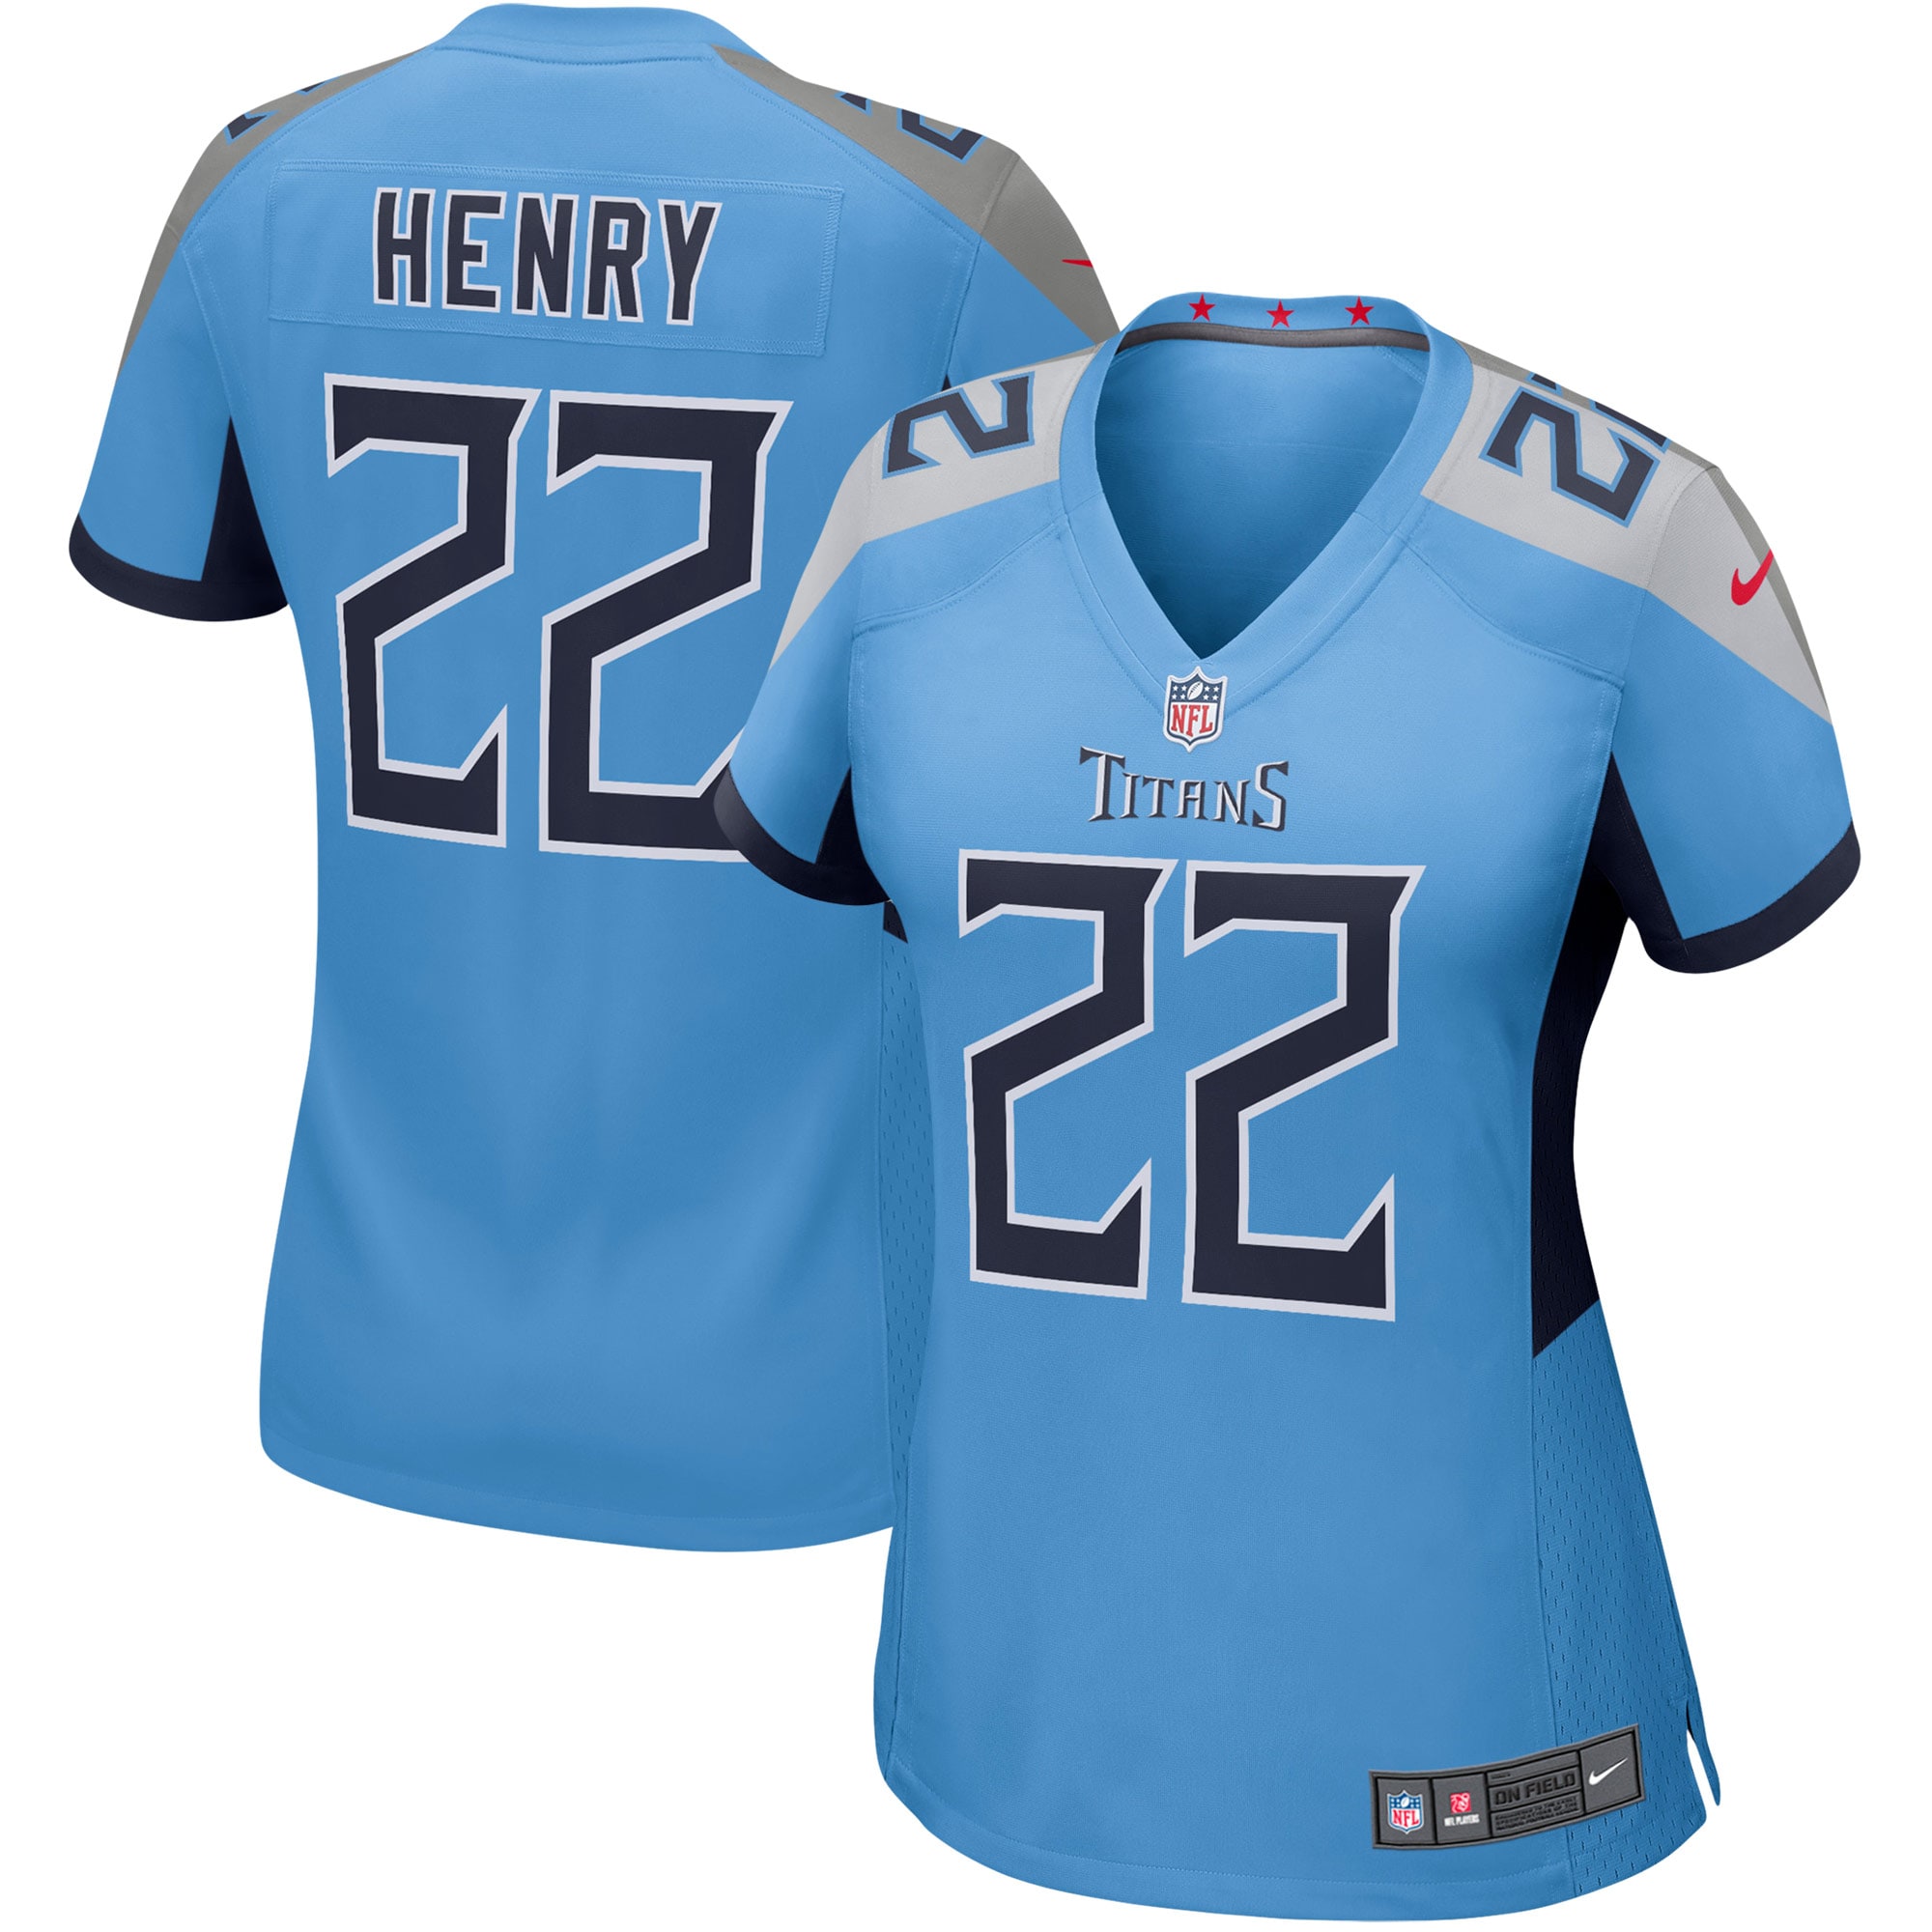 Women's Nike Derrick Henry Light Blue Tennessee Titans Game Jersey - image 1 of 3